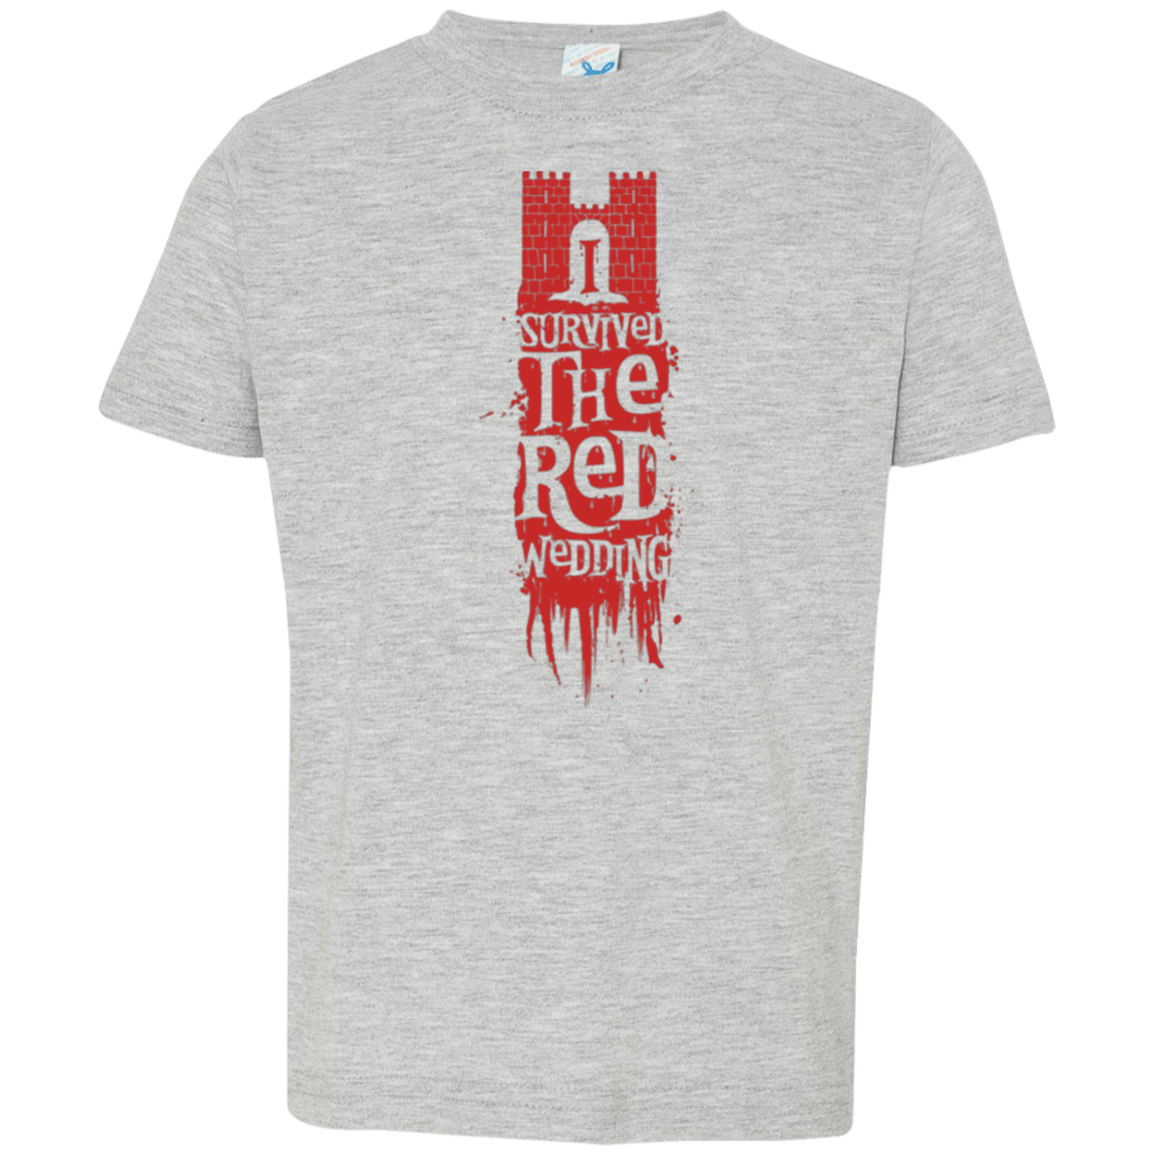 I Survived the Red Wedding Toddler Premium T-Shirt